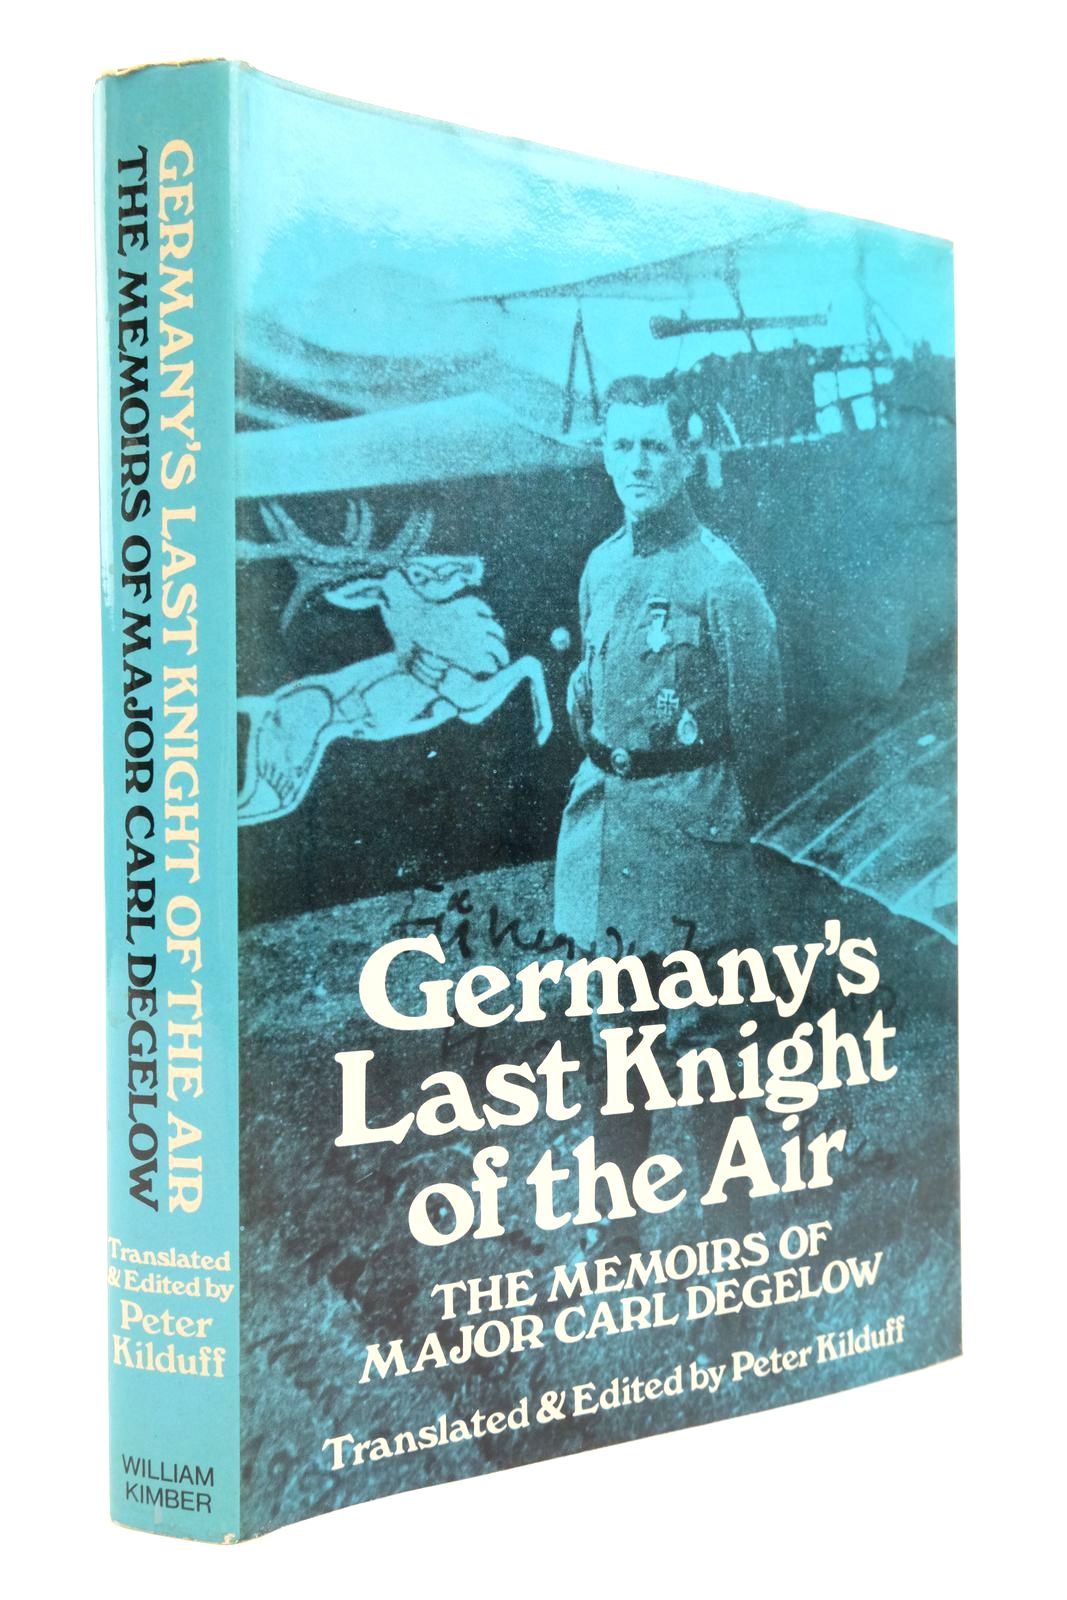 Photo of GERMANY'S LAST KNIGHT OF THE AIR written by Degelow, Carl
Kilduff, Peter published by William Kimber (STOCK CODE: 2139806)  for sale by Stella & Rose's Books